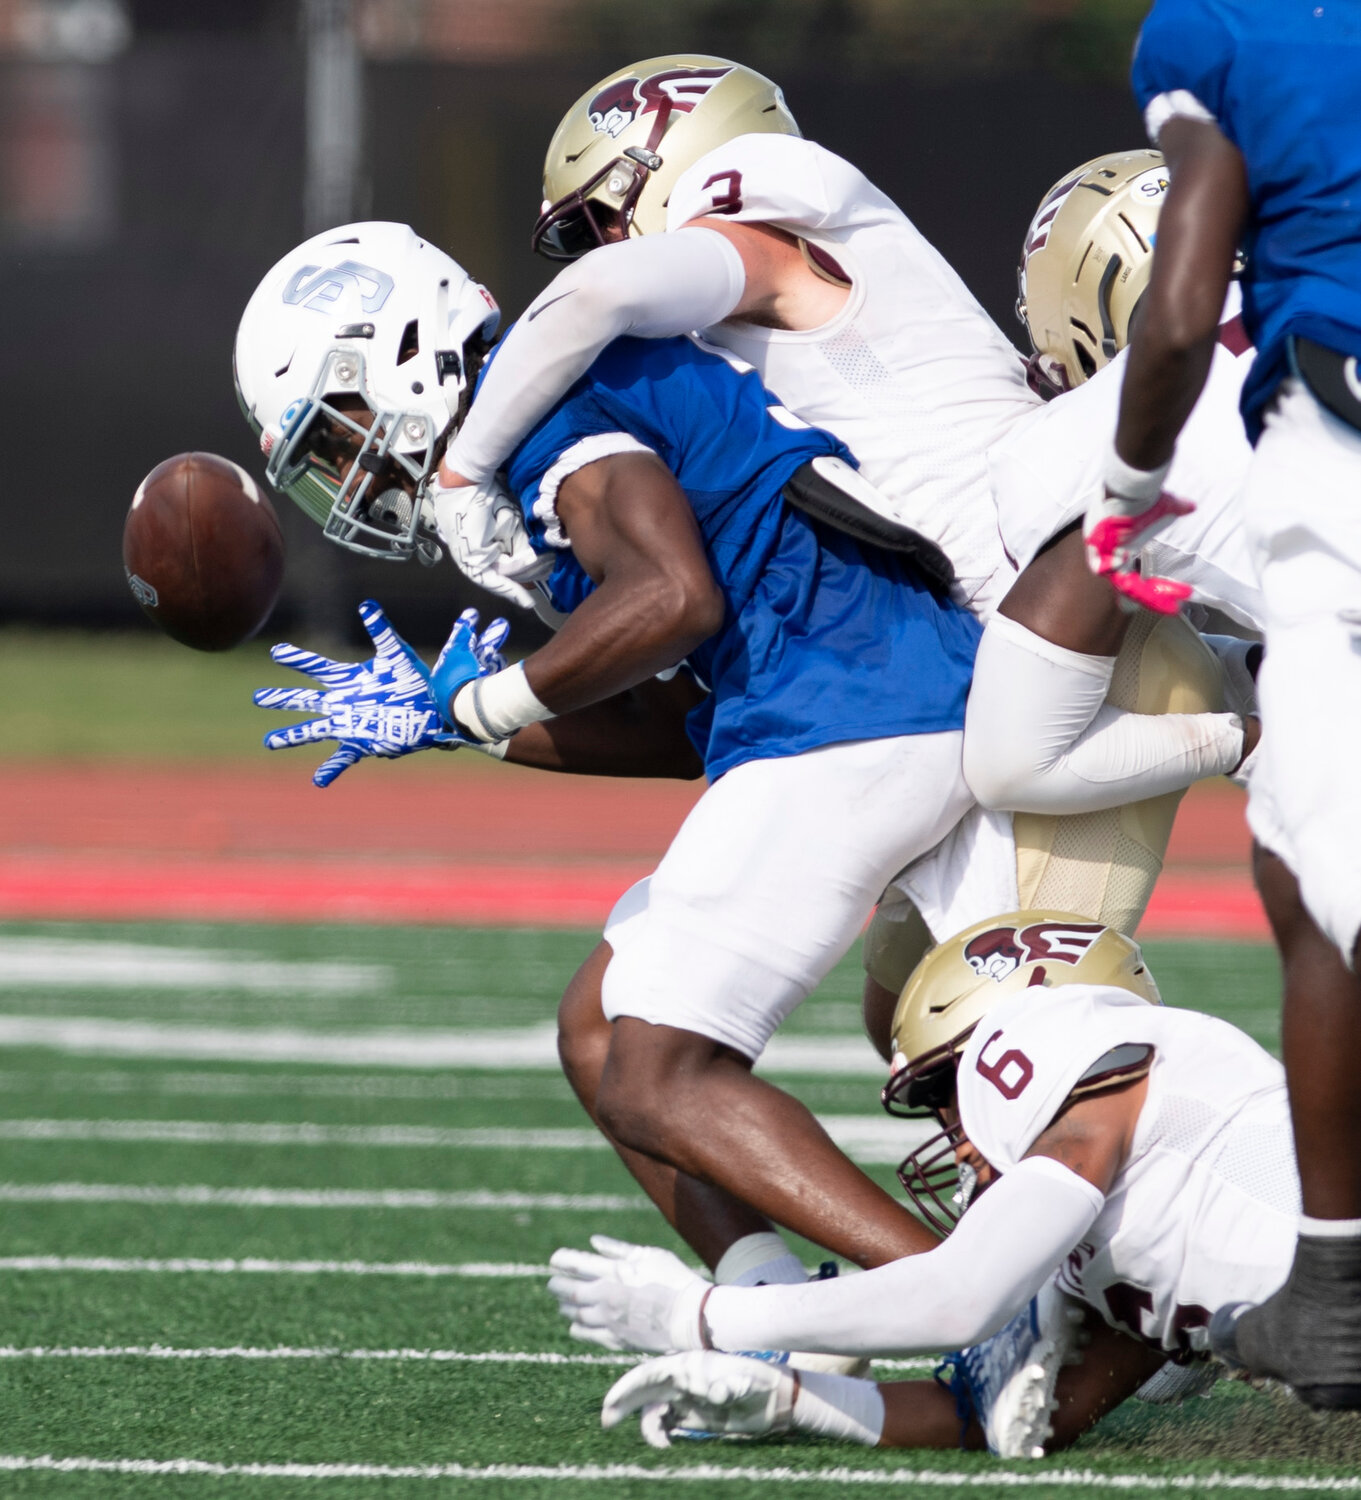 Shorter University wide receiver Jaylin Marshall fumbles as he is tackled by Erskine College's Caleb Gleason and Donovan Bush (6) in the third quarter Saturday, Sept. 9, 2023, in Rome, Ga. The ball went out of bounds and Shorter retained possession. Shorter won 28-7. (Index/Henry Durand)